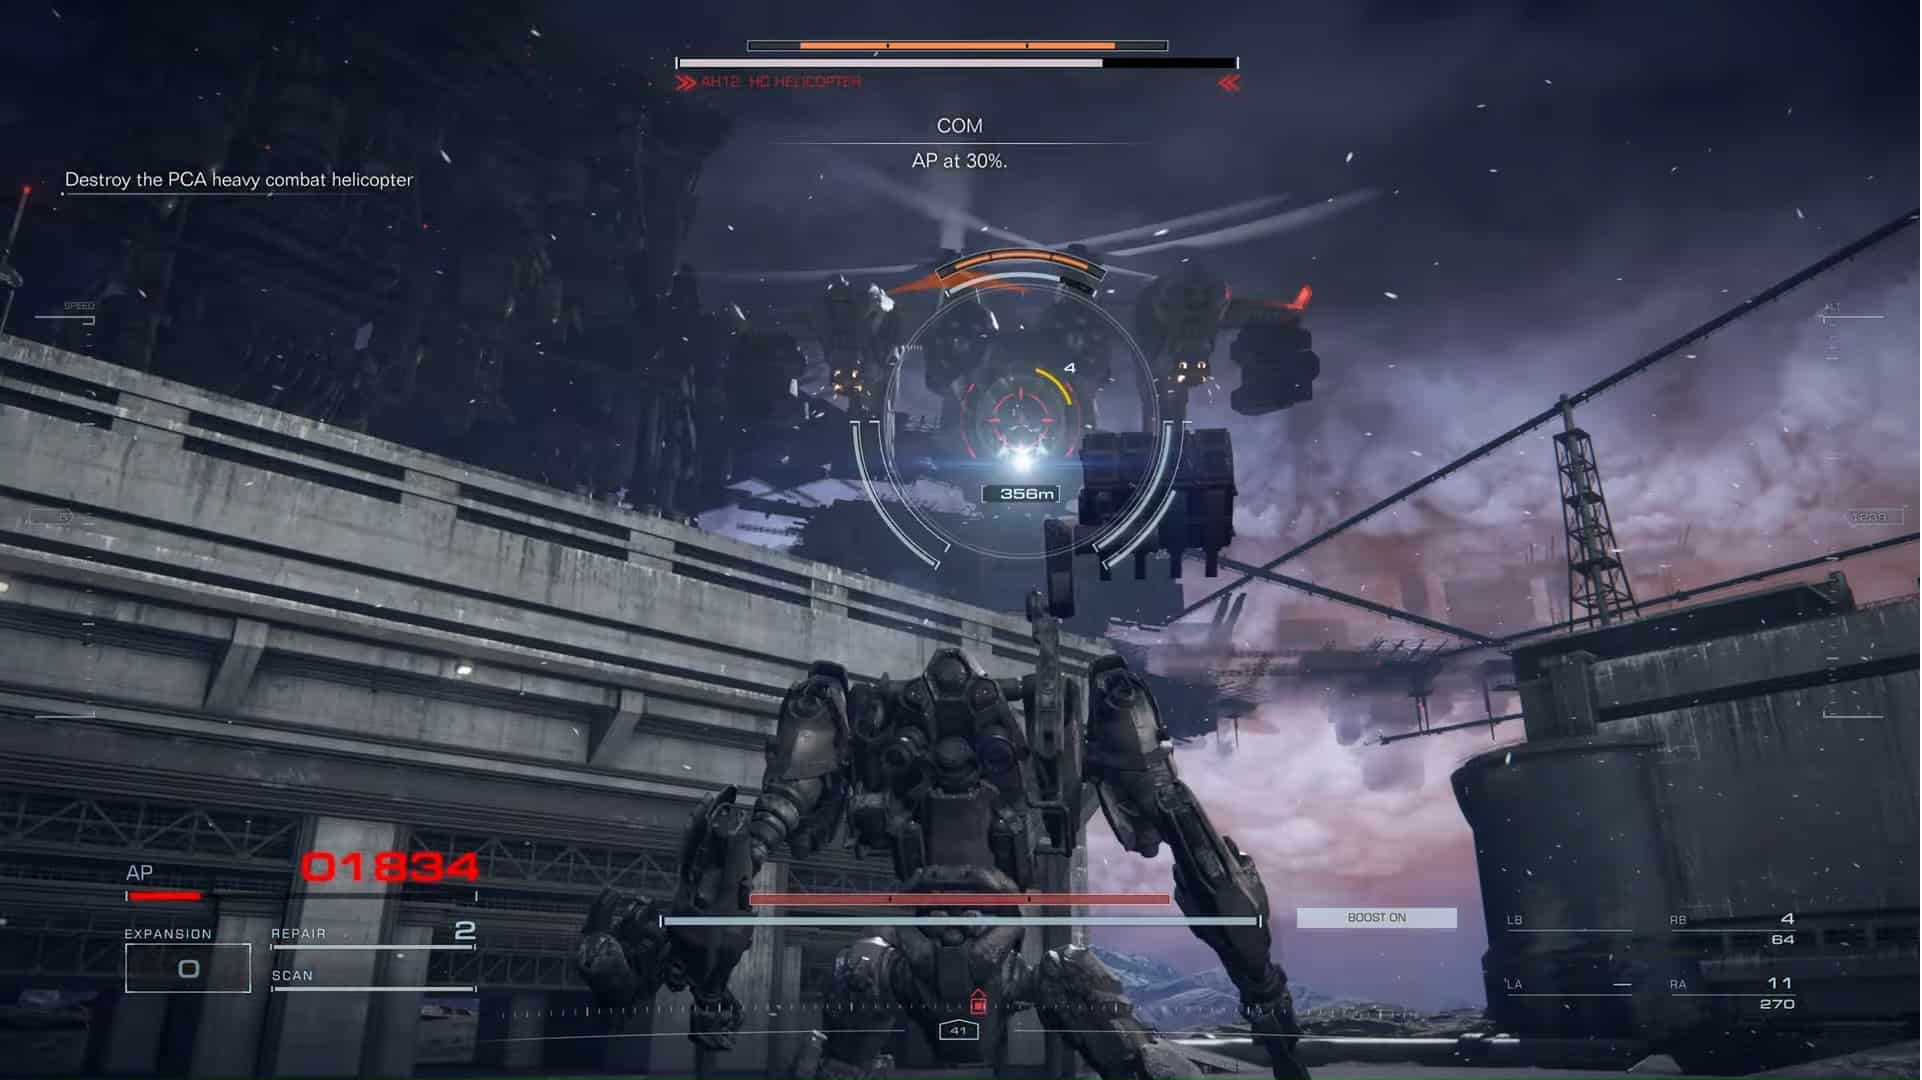 Armored Core 6 Multiplayer Featured Image